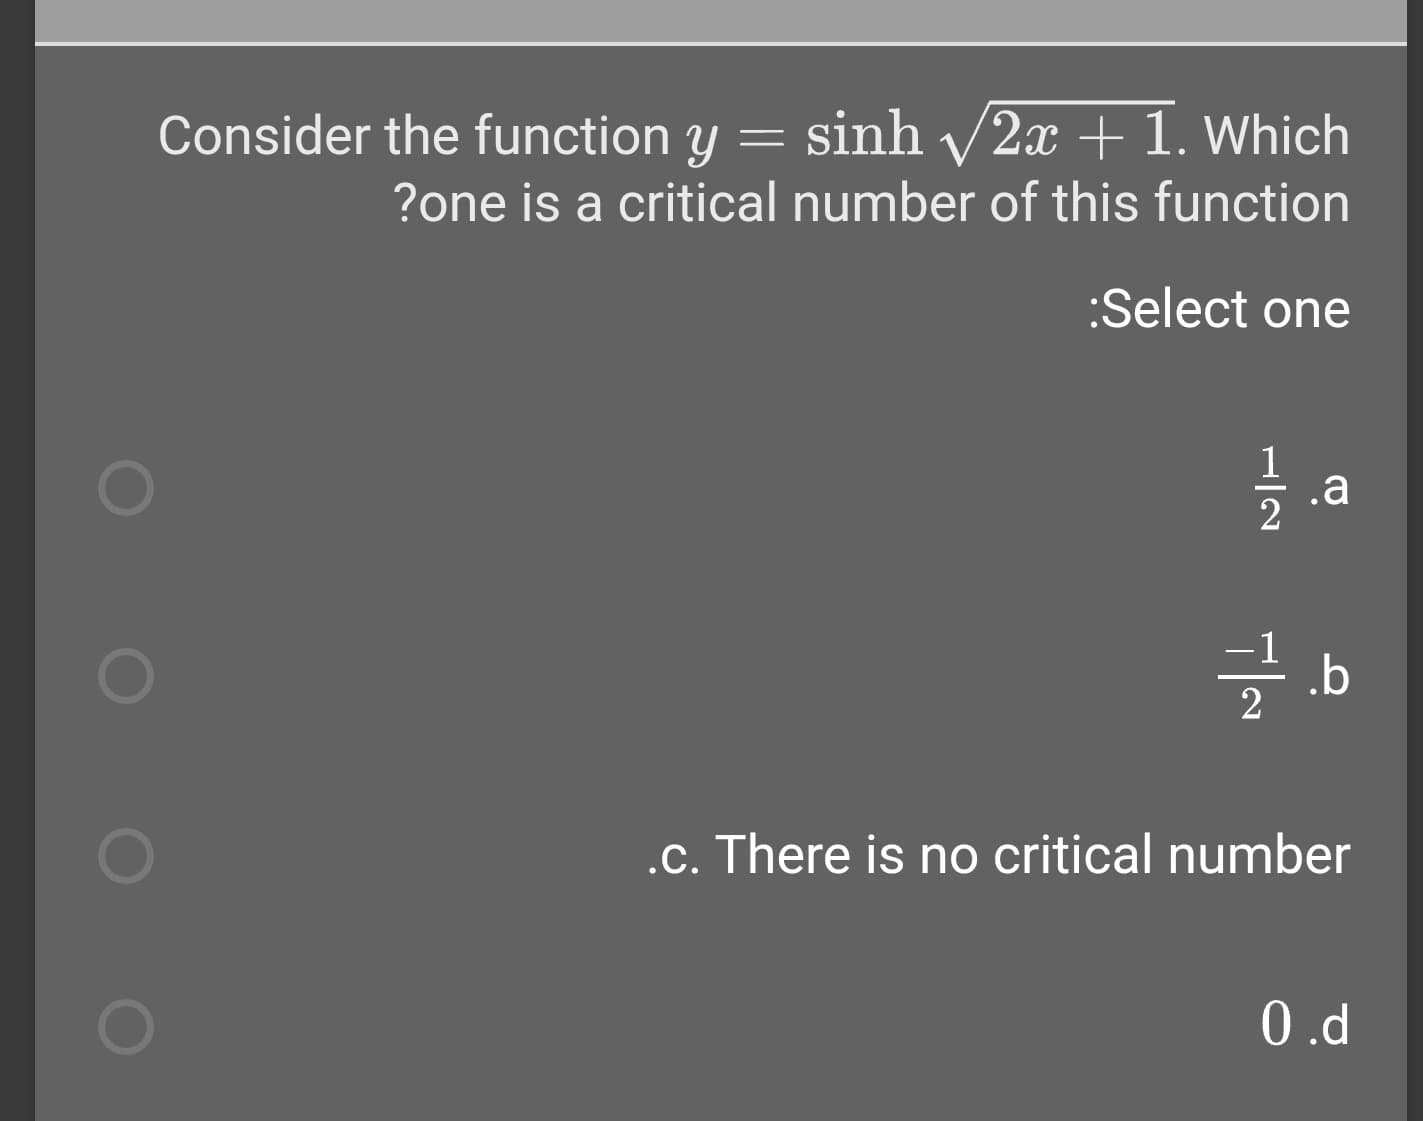 Consider the function y = sinh /2x + 1. Which
?one is a critical number of this function
:Select one
.a
글b
.c. There is no critical number
0.d
